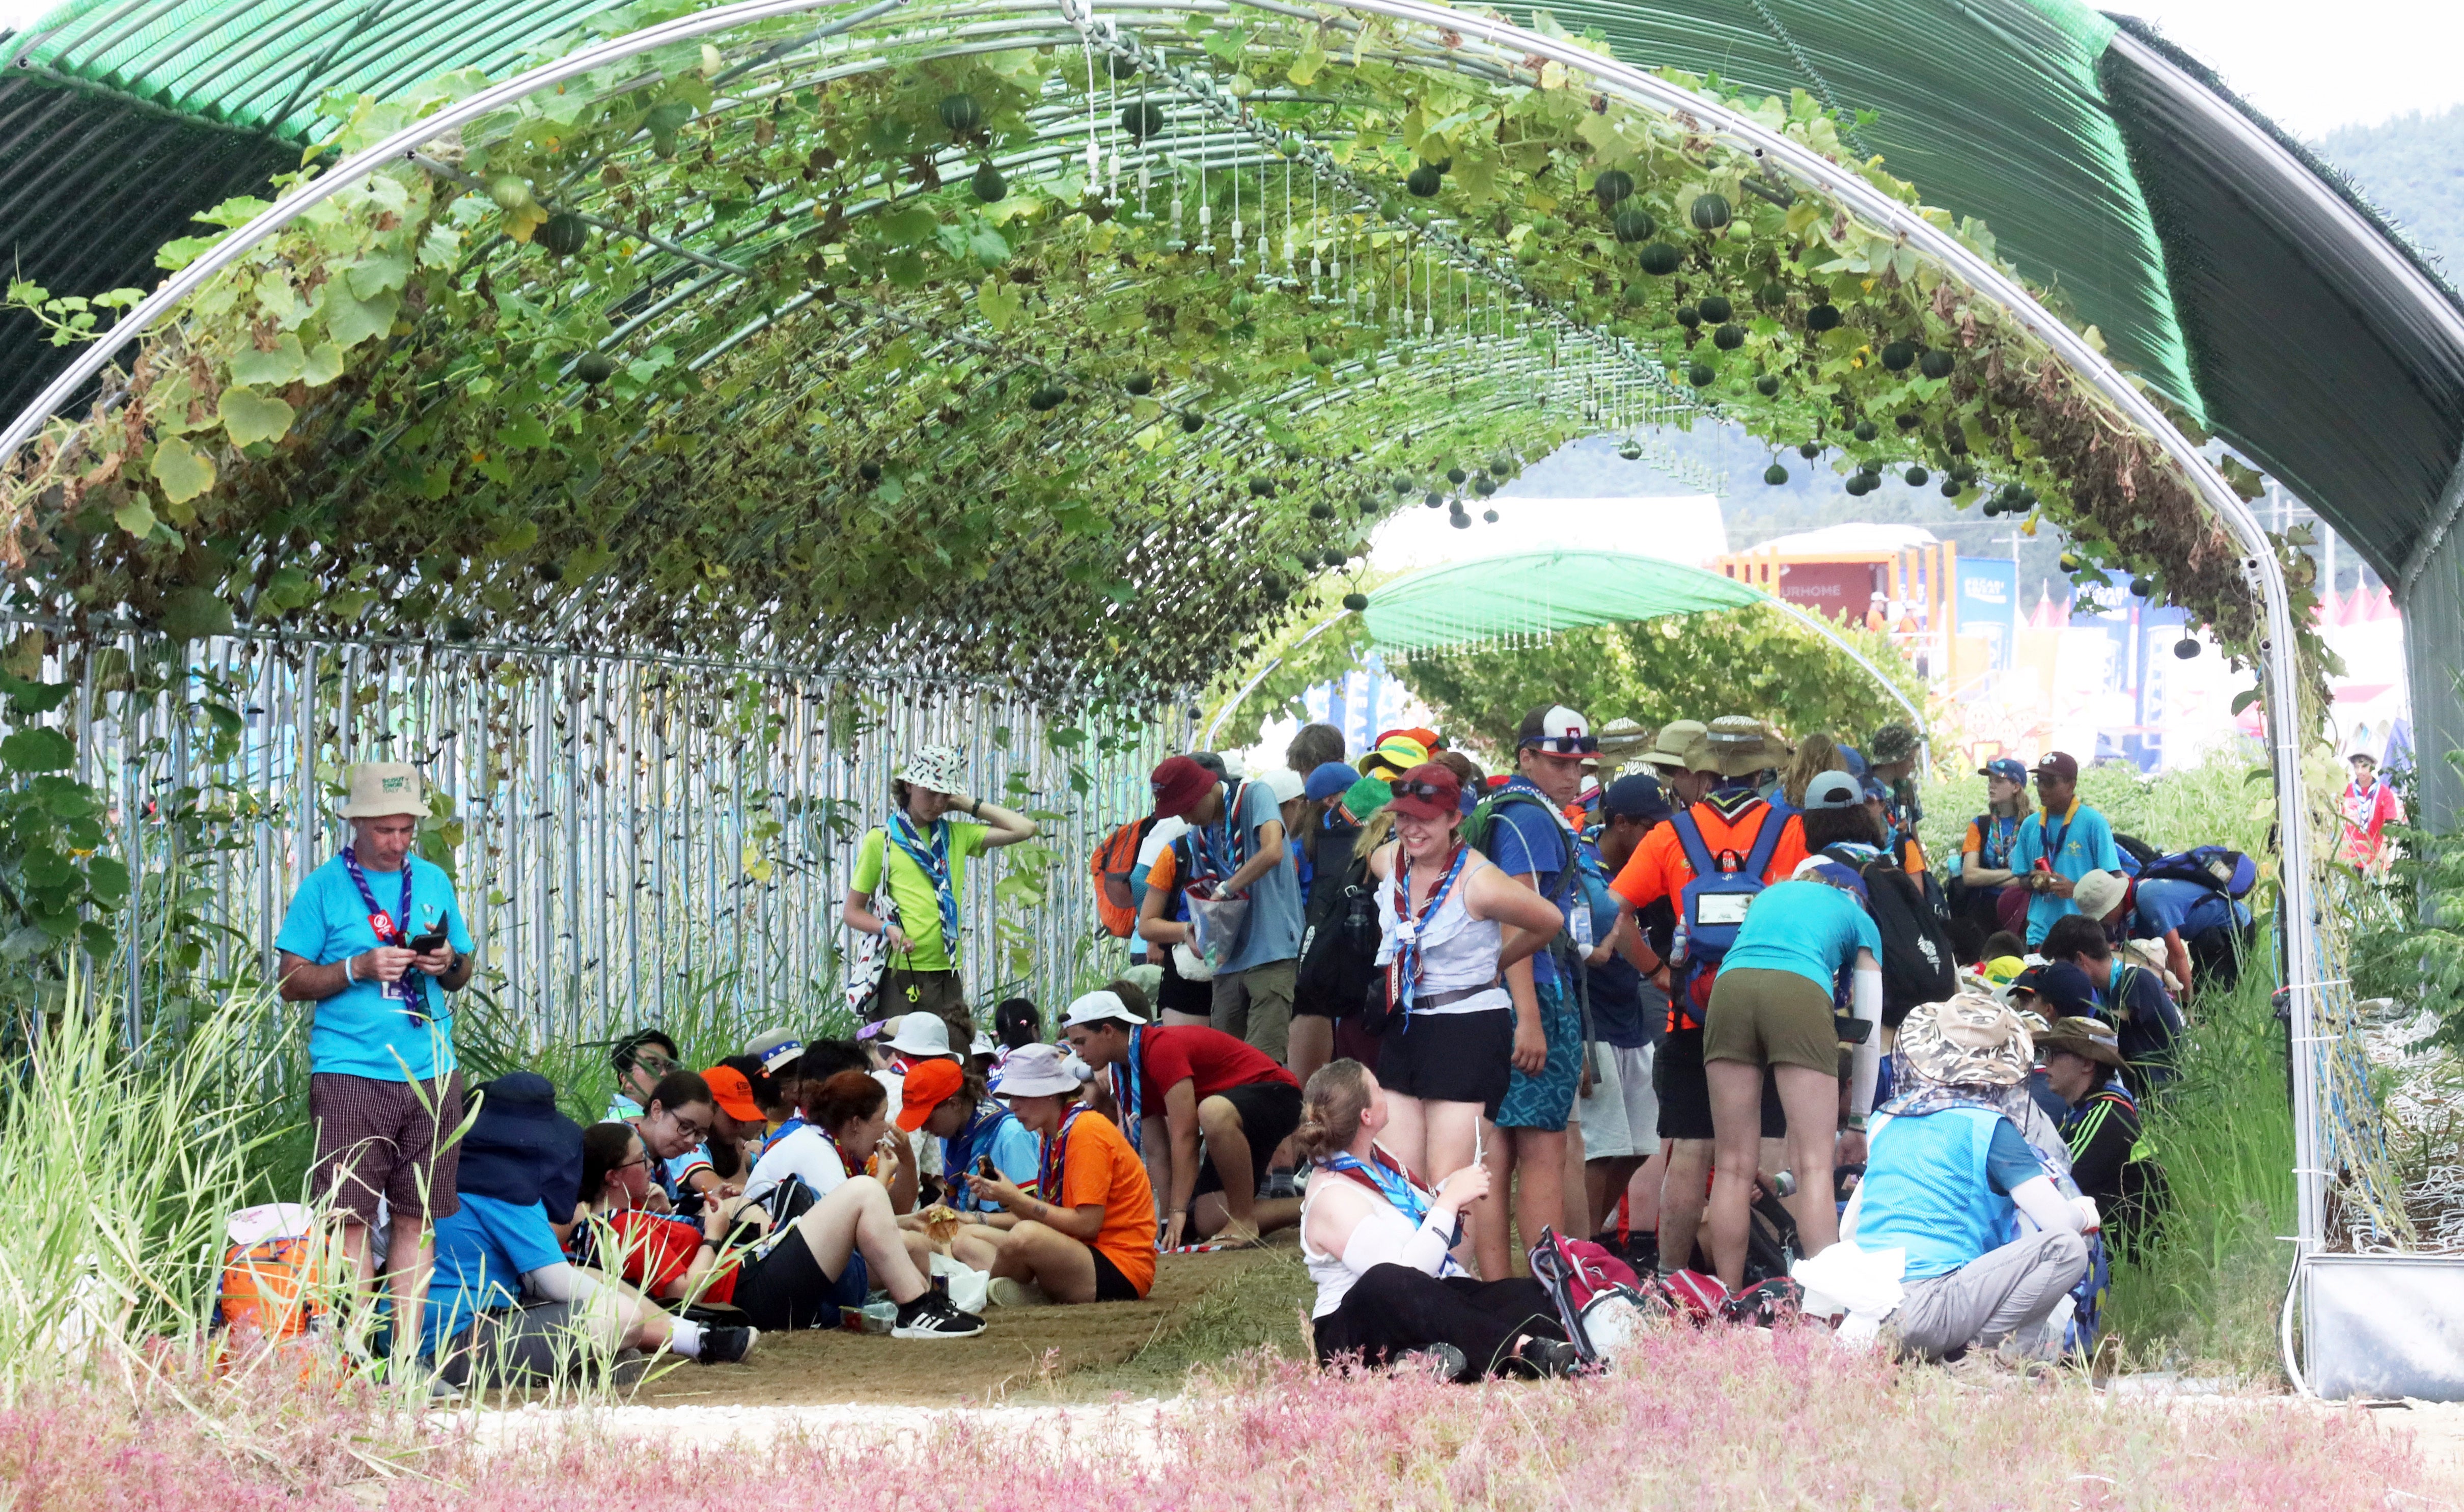 File. Attendees of the World Scout Jamboree beat the heat under a vine tunnel at a campsite in Buan, South Korea, Friday, 4 August 2023. - More than 100 people were treated for heat-related illnesses at the World Scout Jamboree being held in South Korea, which is having one of its hottest summers in years